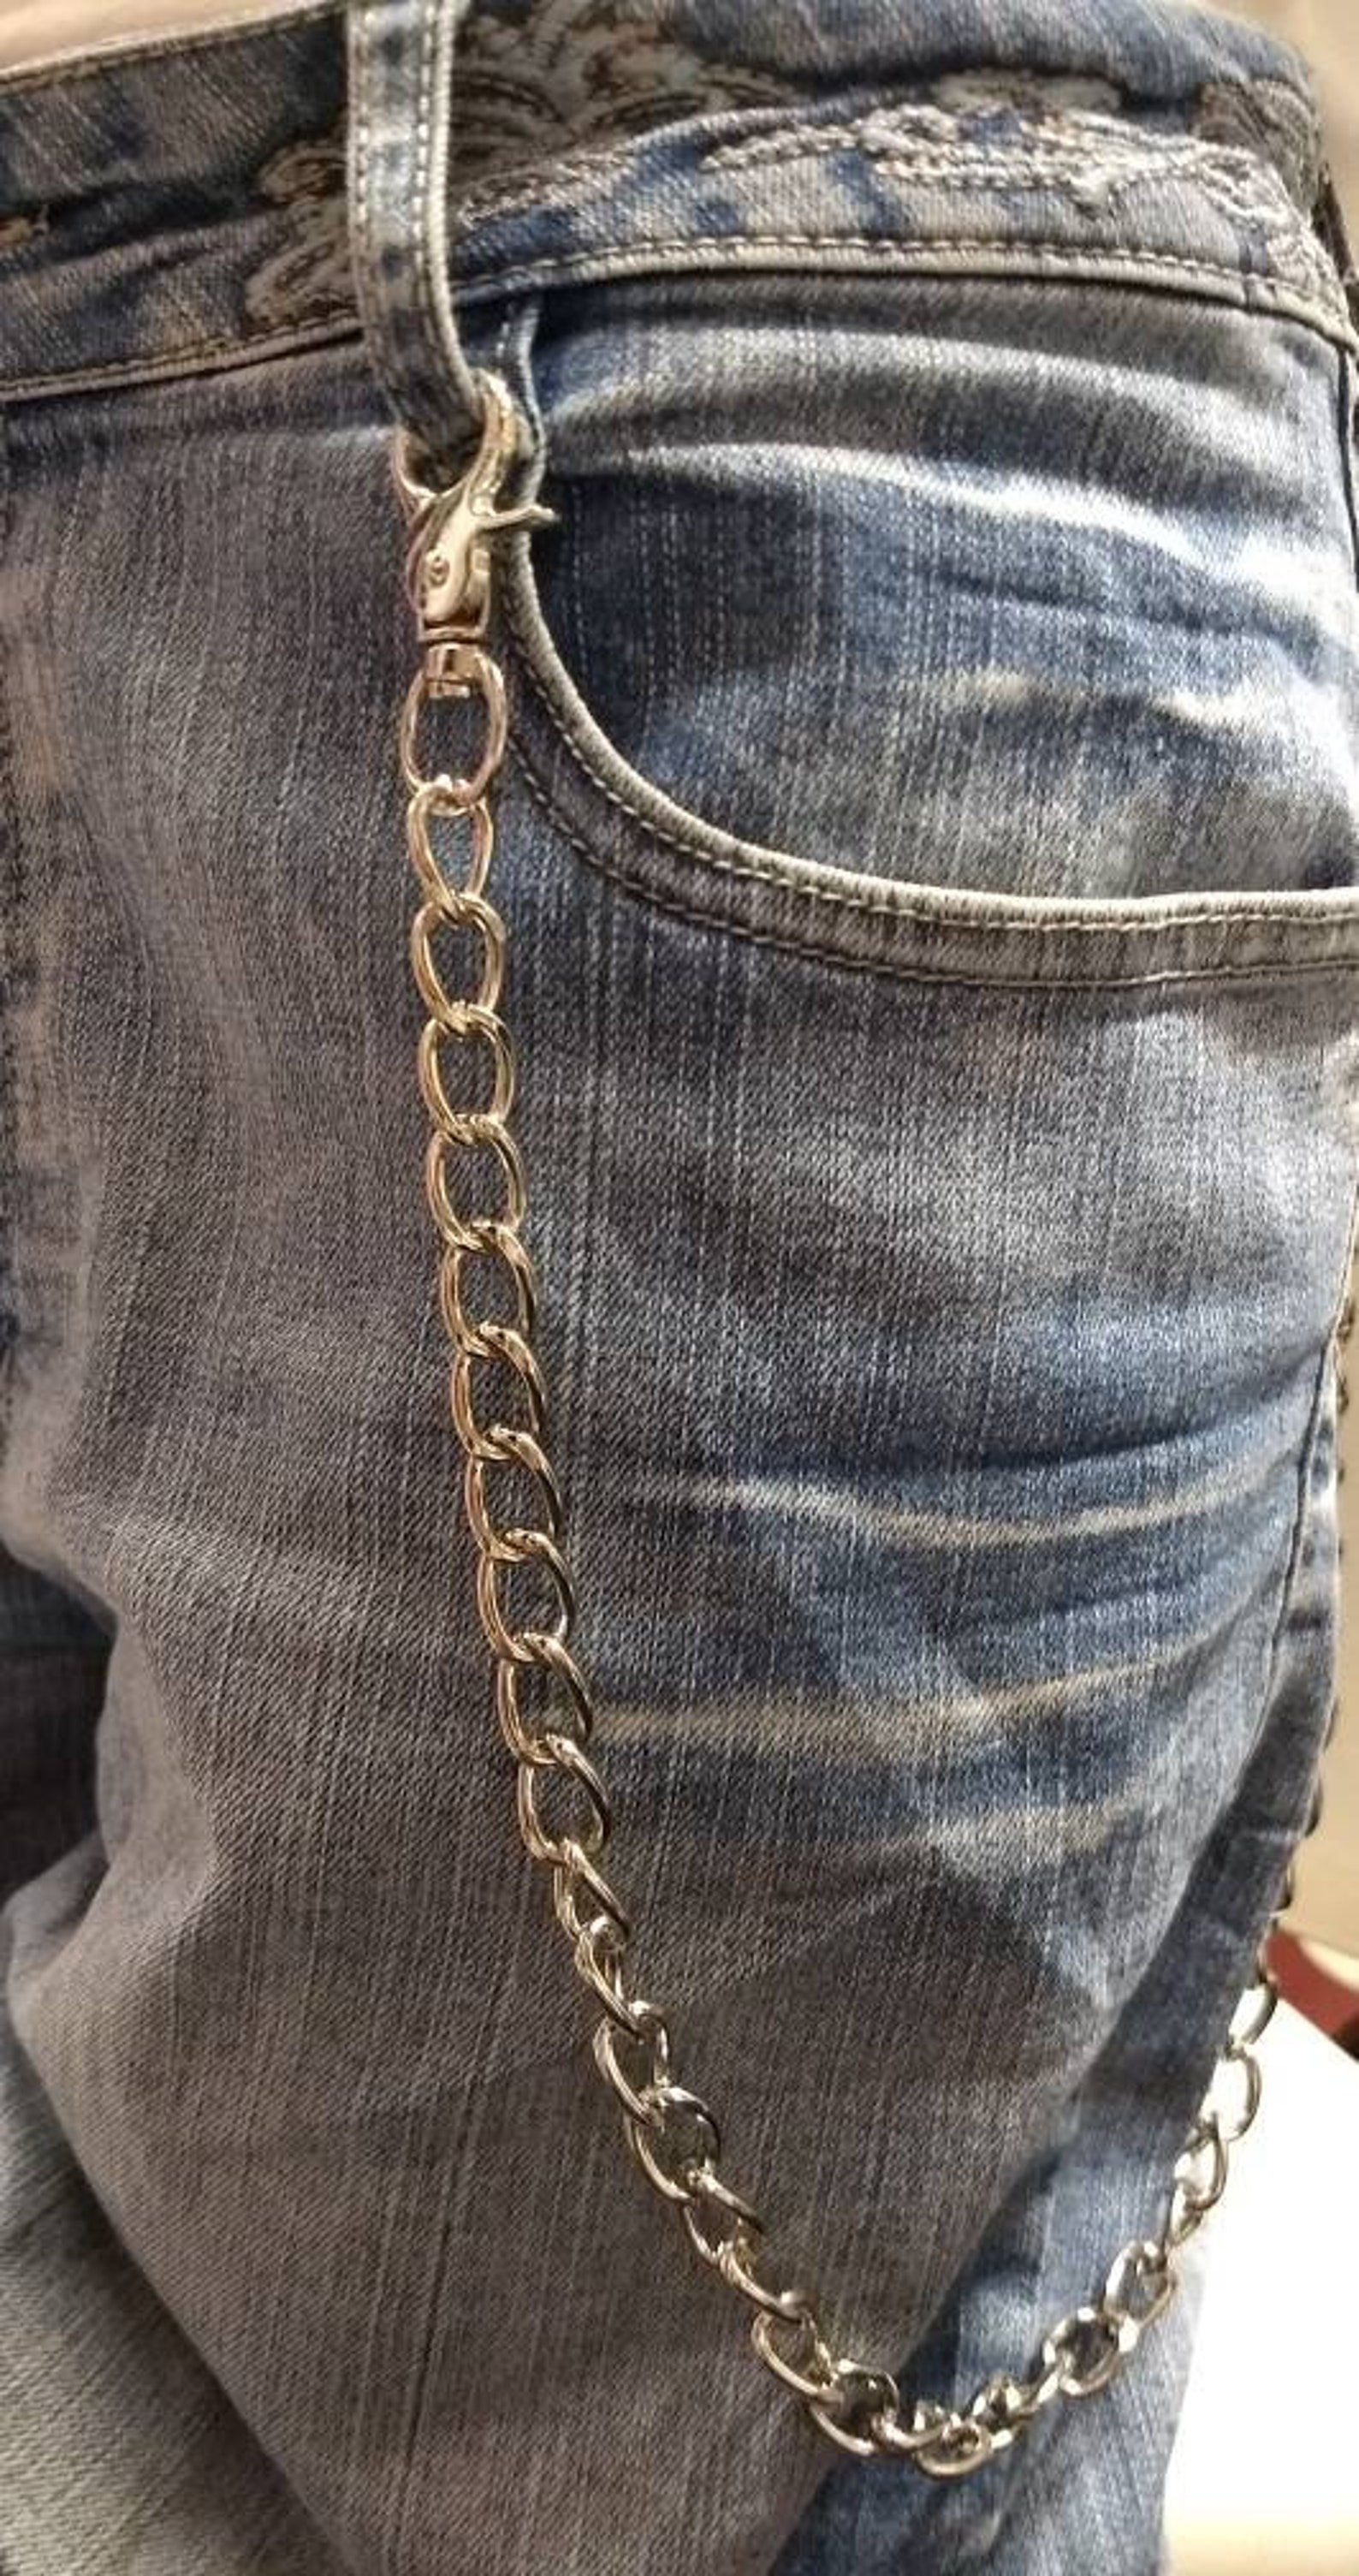 Pocket chain belt Chain punk heavy duty eboy chains for pants | Etsy